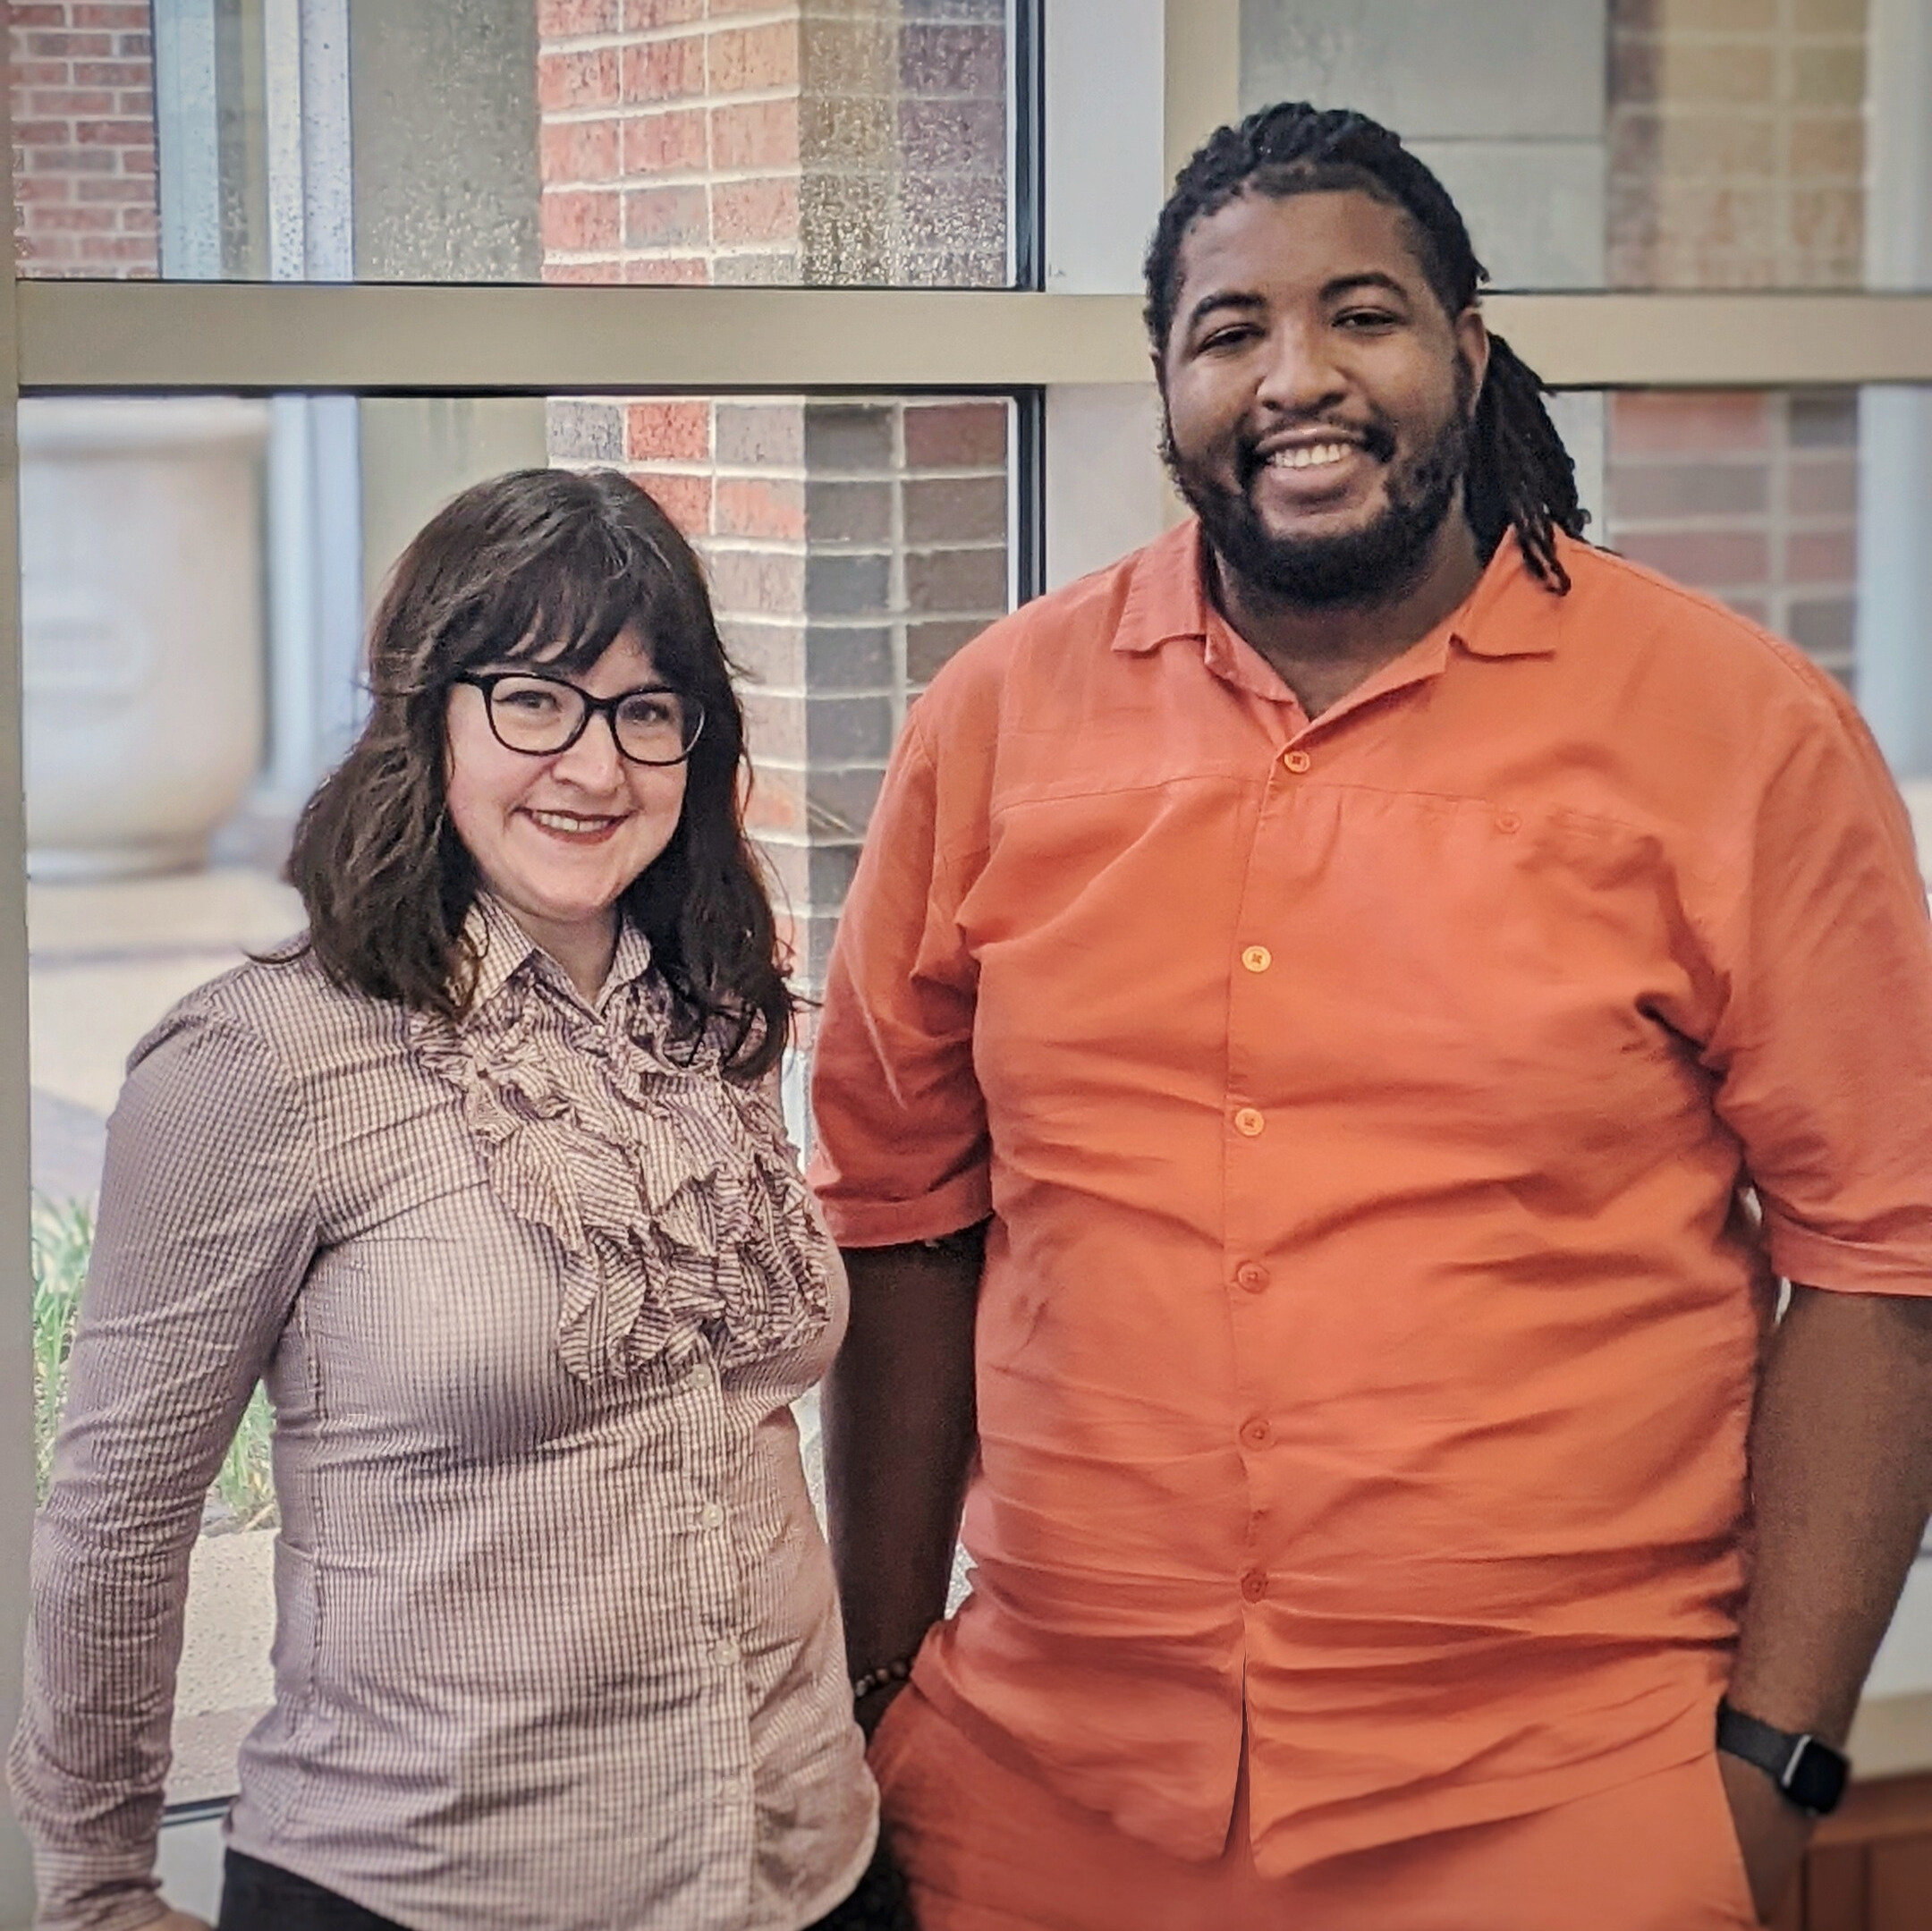 Student workers Joy Morrow and Azeez Akande posing in Hamon Arts Library. Both are smiling.